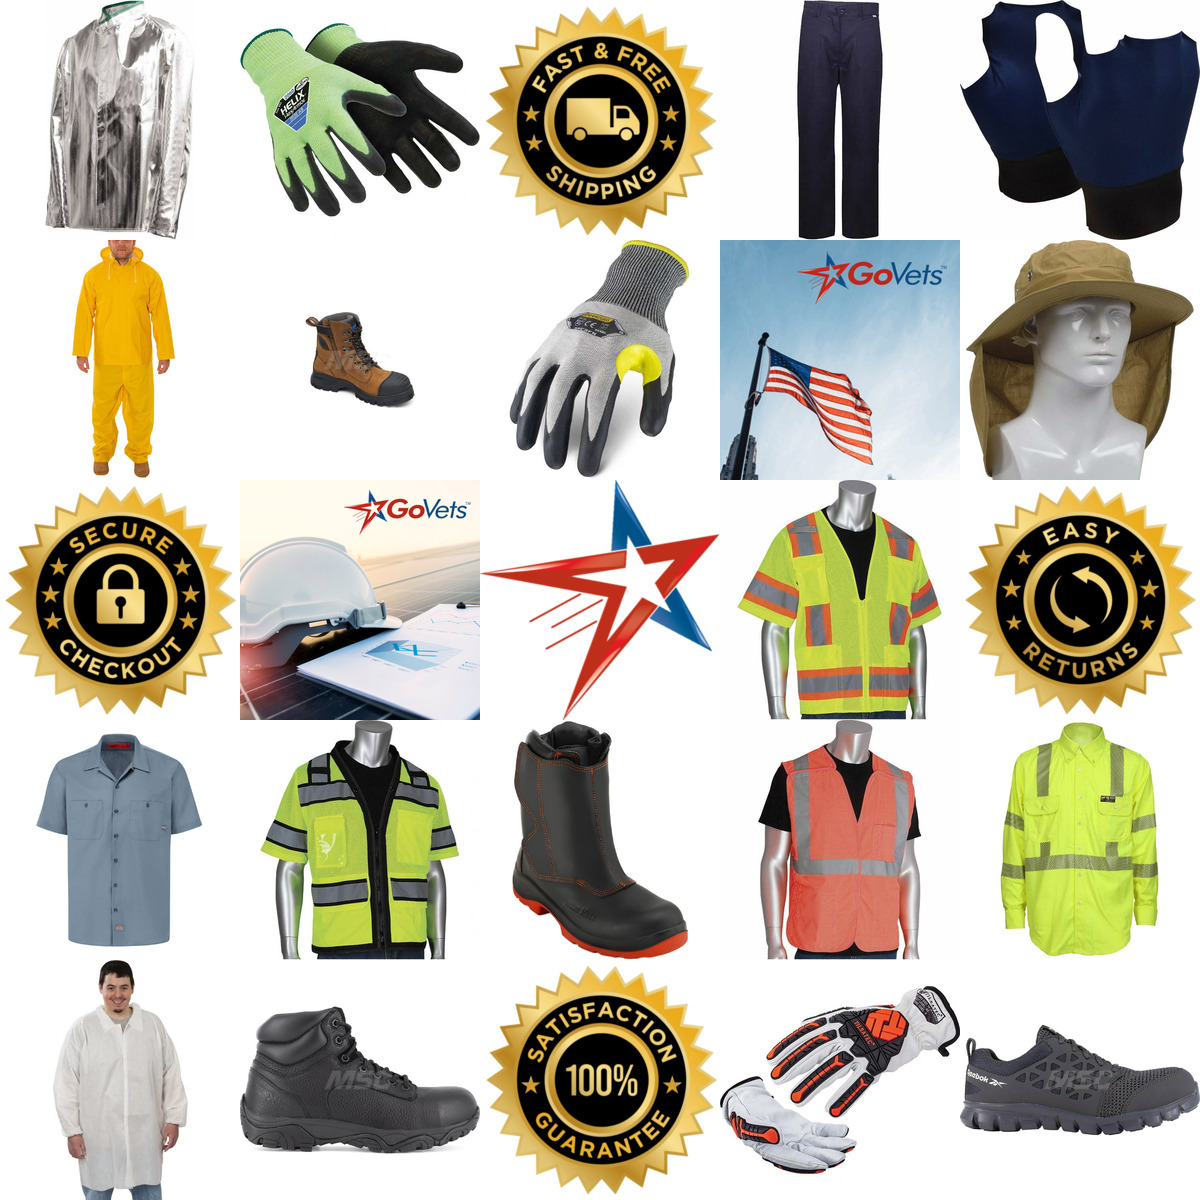 A selection of Personal Protective Equipment products on GoVets